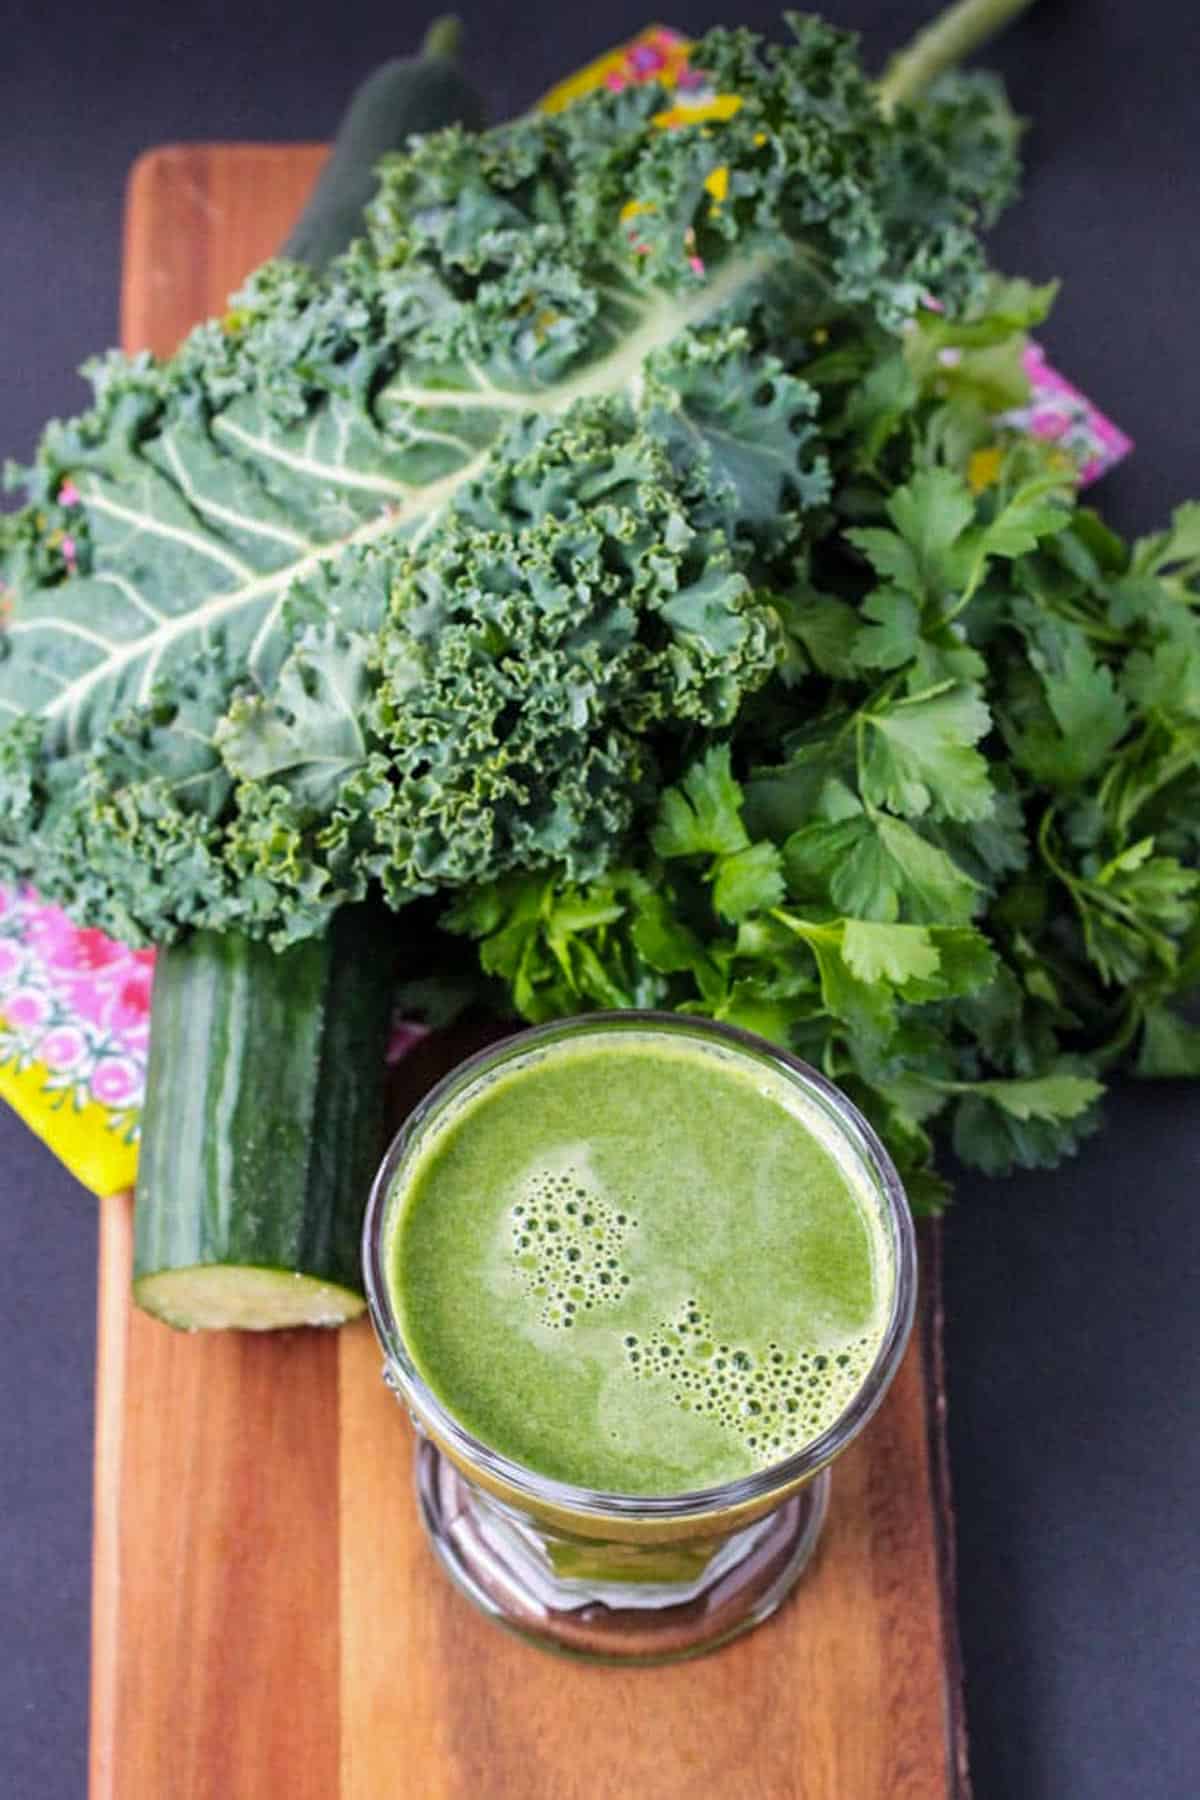 Glass of green juice next to lots of fresh green vegetables.